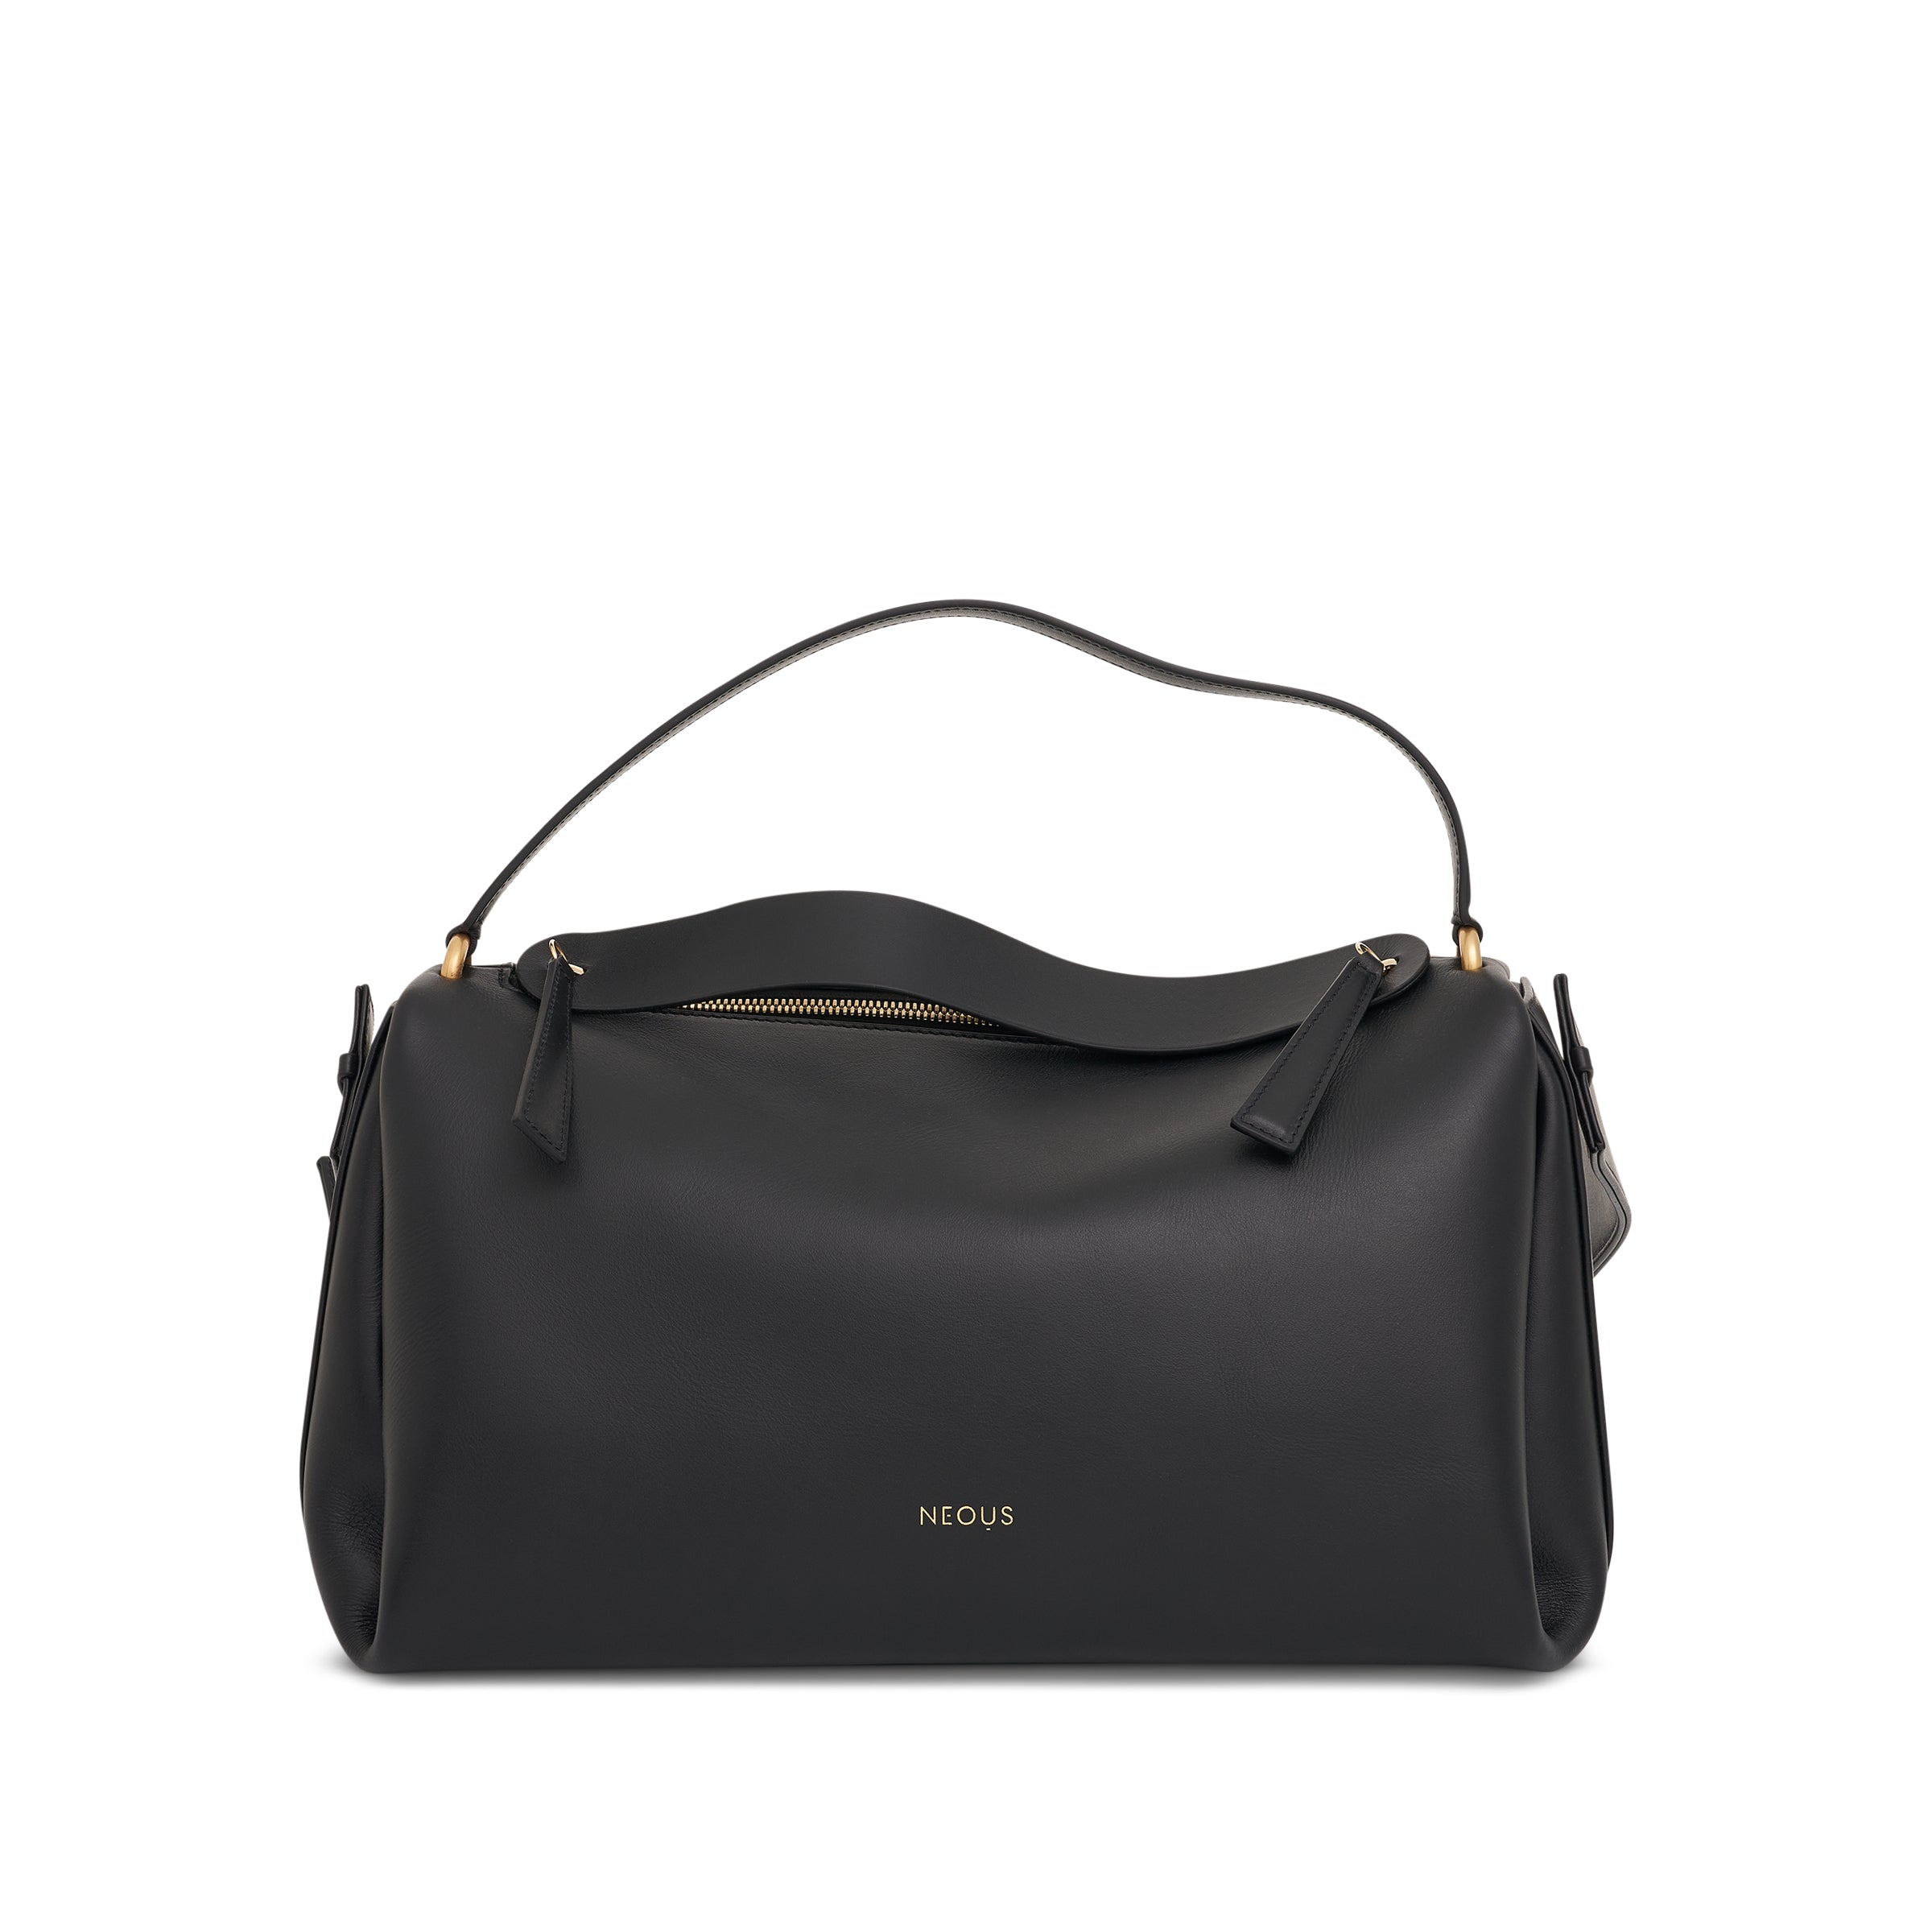 neous scorpius bag in black sold out sold out sale earn 675 mr points ...